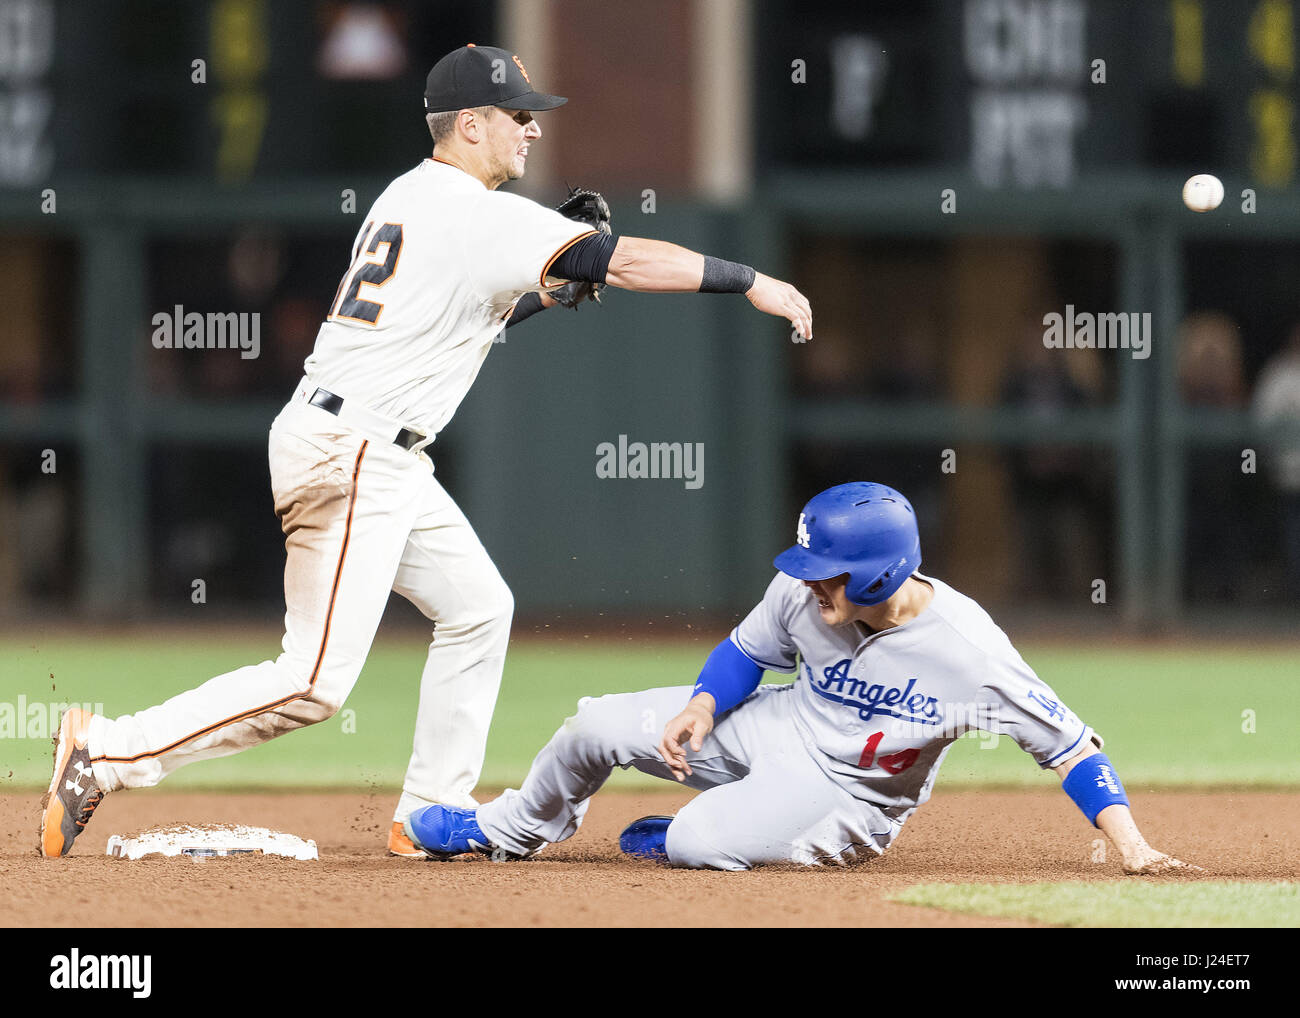 San Francisco, California, USA. 24th Apr, 2017. San Francisco Giants second baseman Joe Panik (12) tags the base to get Los Angeles Dodgers shortstop Enrique Hernandez (14) out at second base and make the throw for a double play during a MLB baseball game between the Los Angeles Dodgers and the San Francisco Giants at AT&T Park in San Francisco, California. Valerie Shoaps/CSM/Alamy Live News Stock Photo